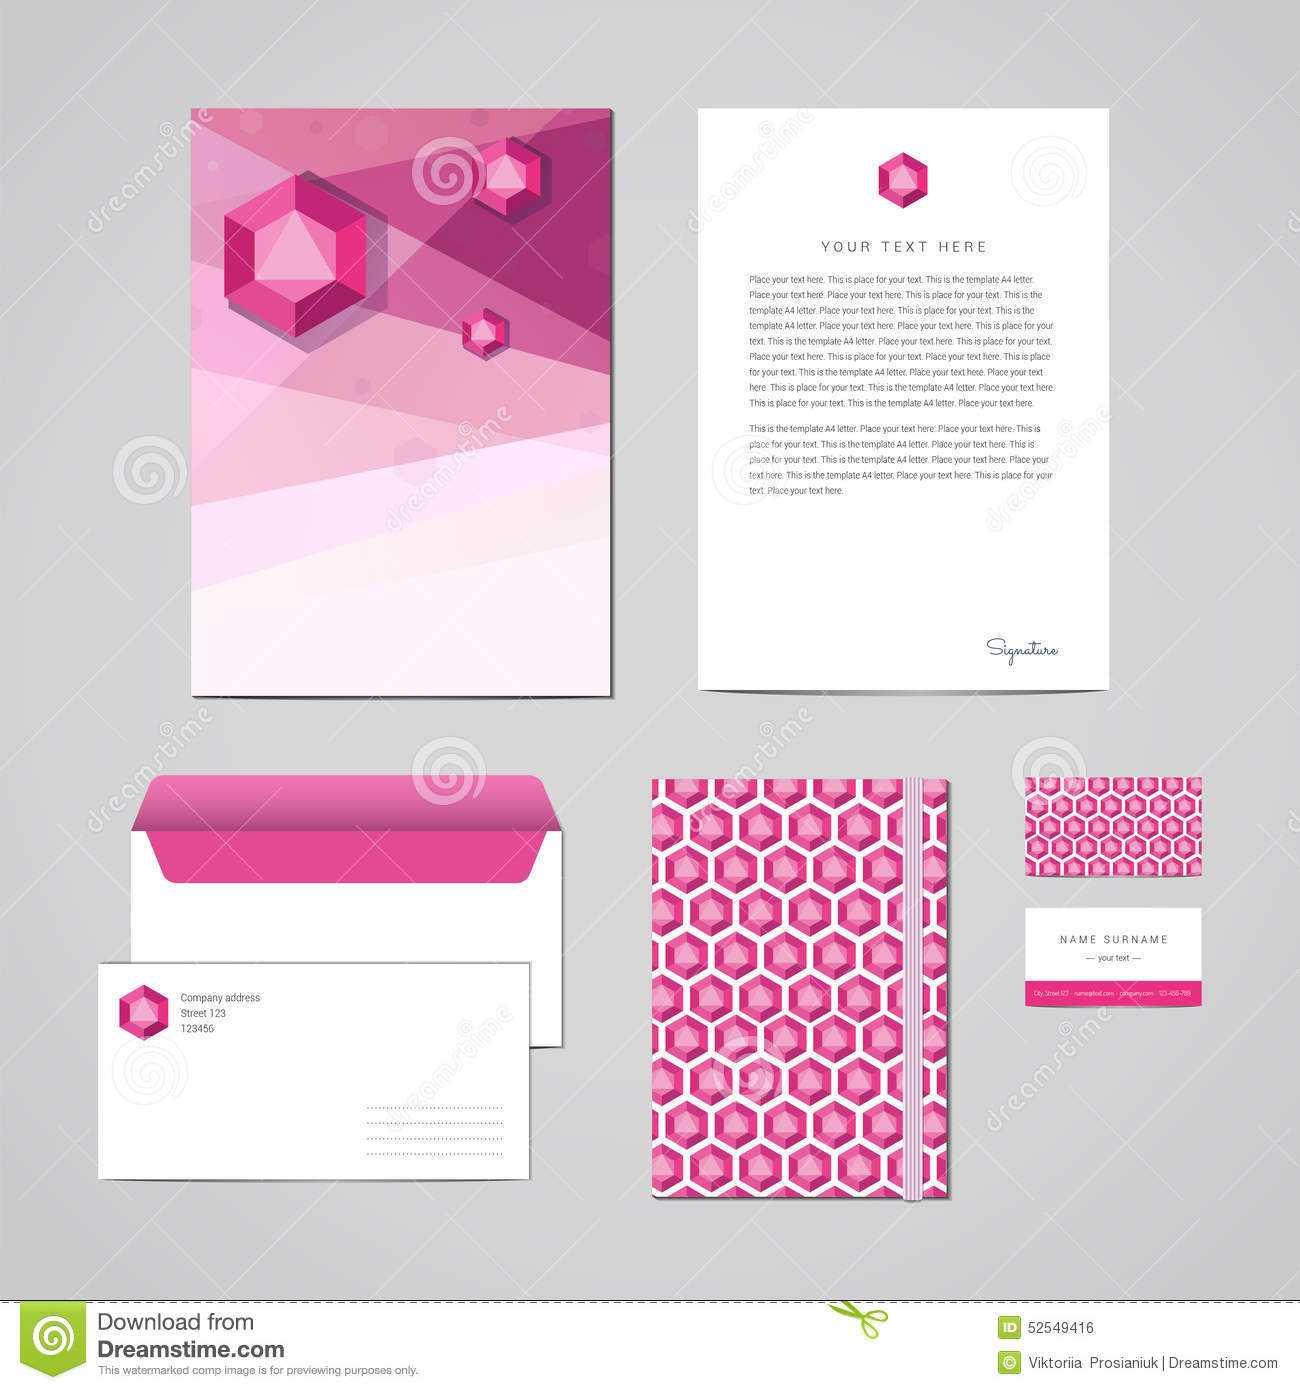 Corporate Identity Design Template. Documentation For Throughout Business Card Letterhead Envelope Template